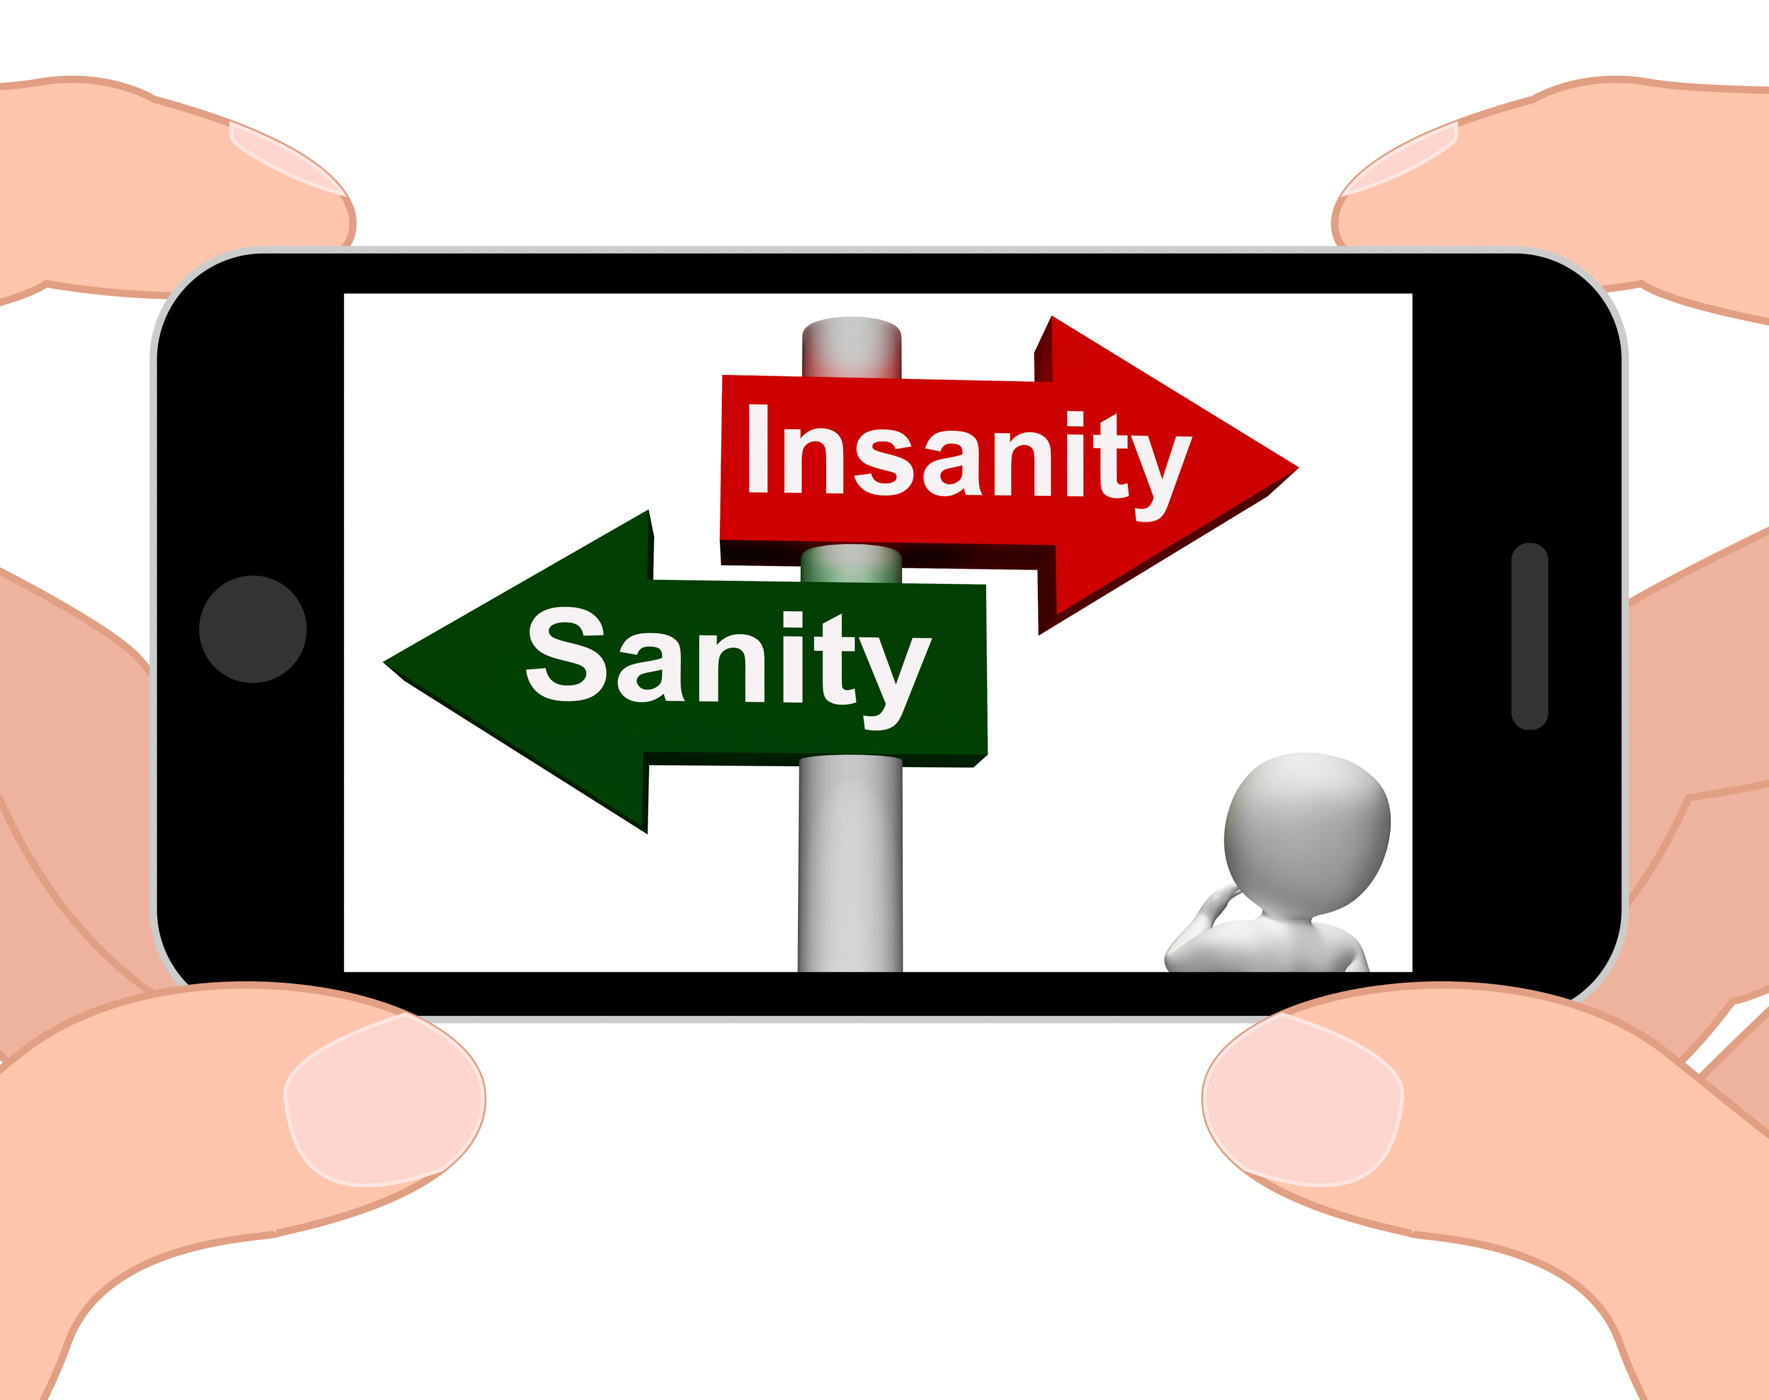 Insanity Sanity Signpost Displays Sane Or Insane, 3d, Phone, Web, Therapy, HQ Photo